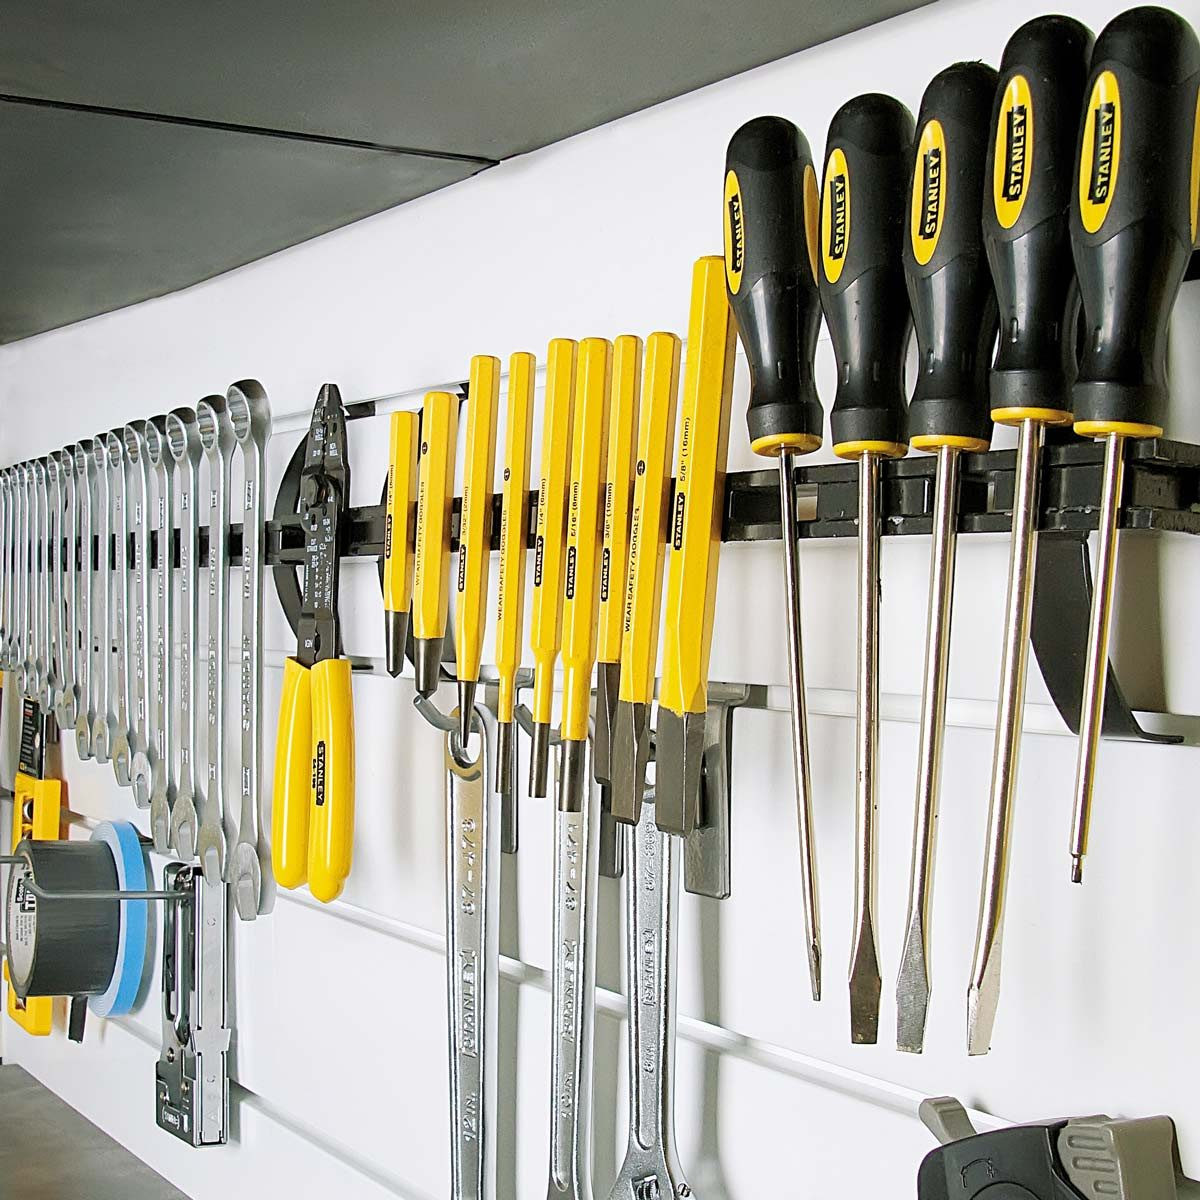 Organizing Your Garage
 10 Tips for Organizing Your Garage and Keeping It Organized